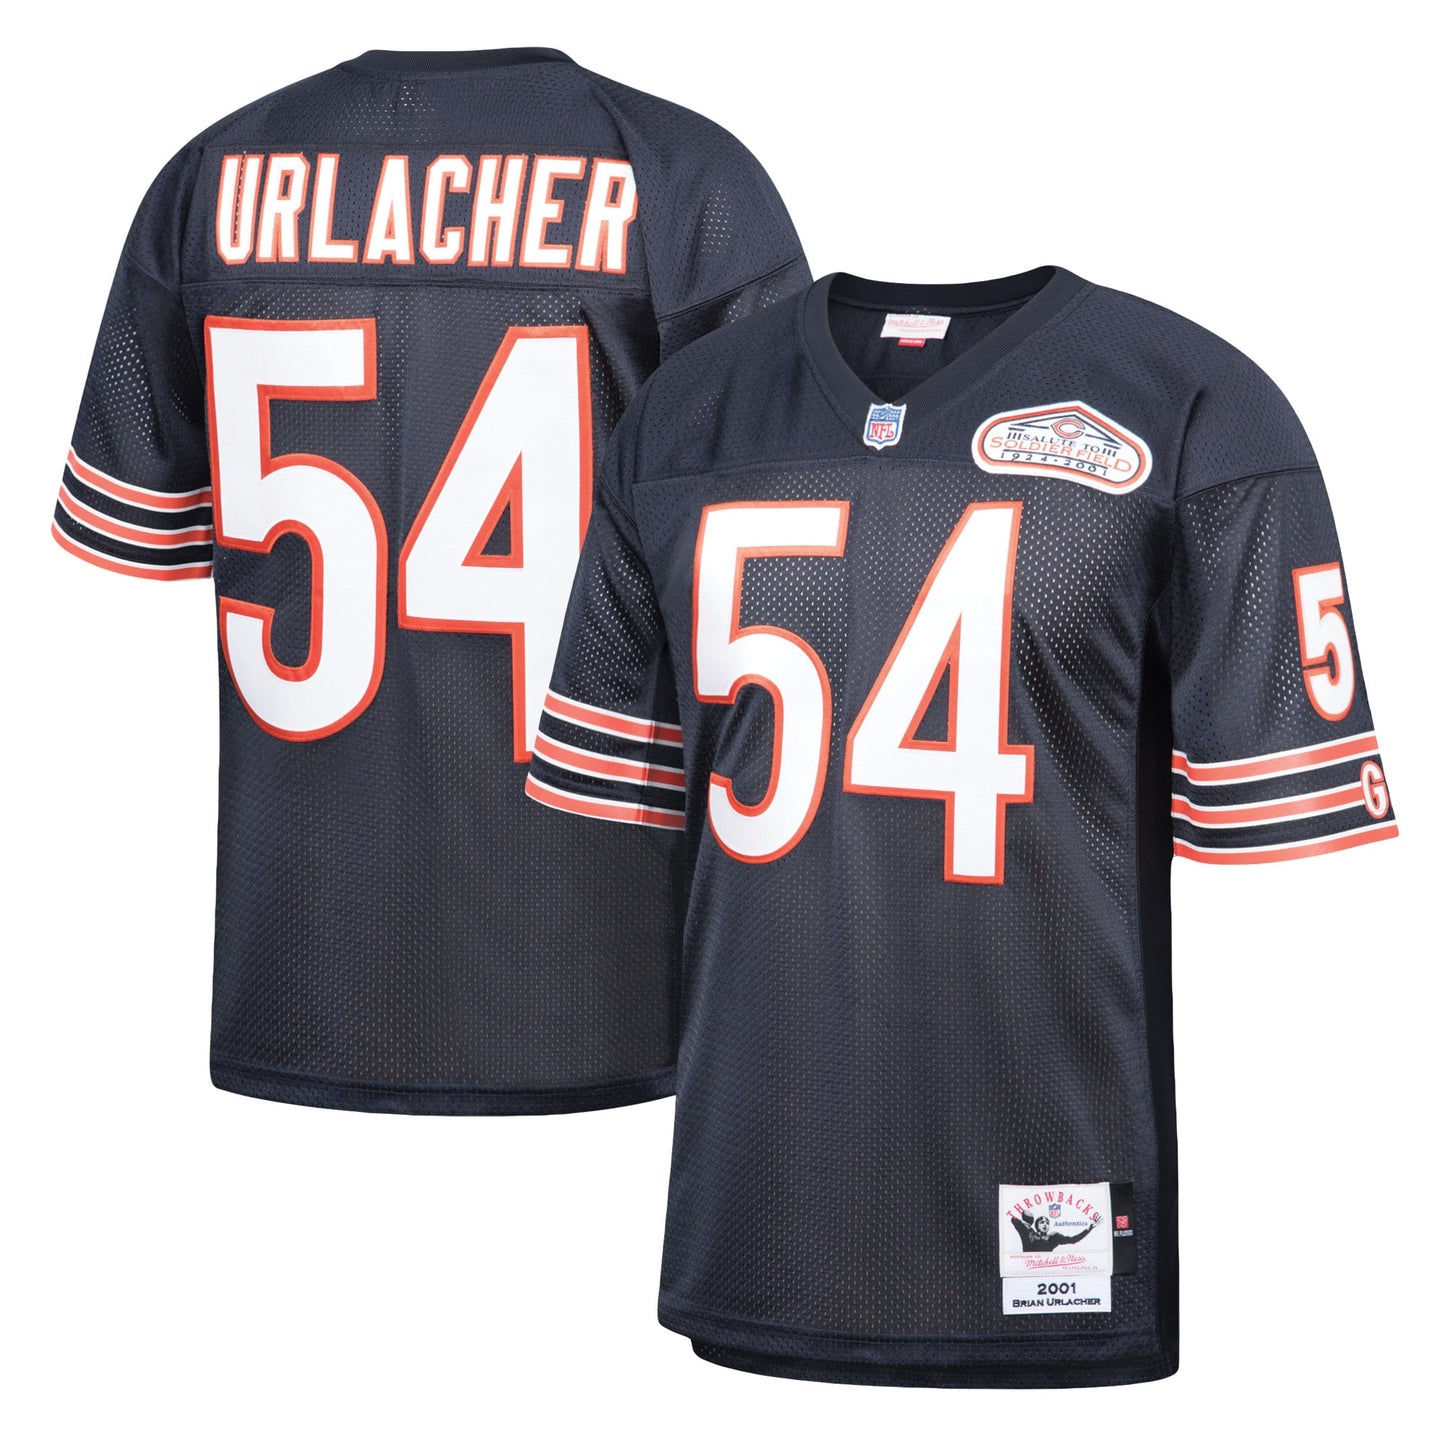 Brian Urlacher Chicago Bears Mitchell & Ness 2001 Authentic Throwback Retired Player Jersey - Navy